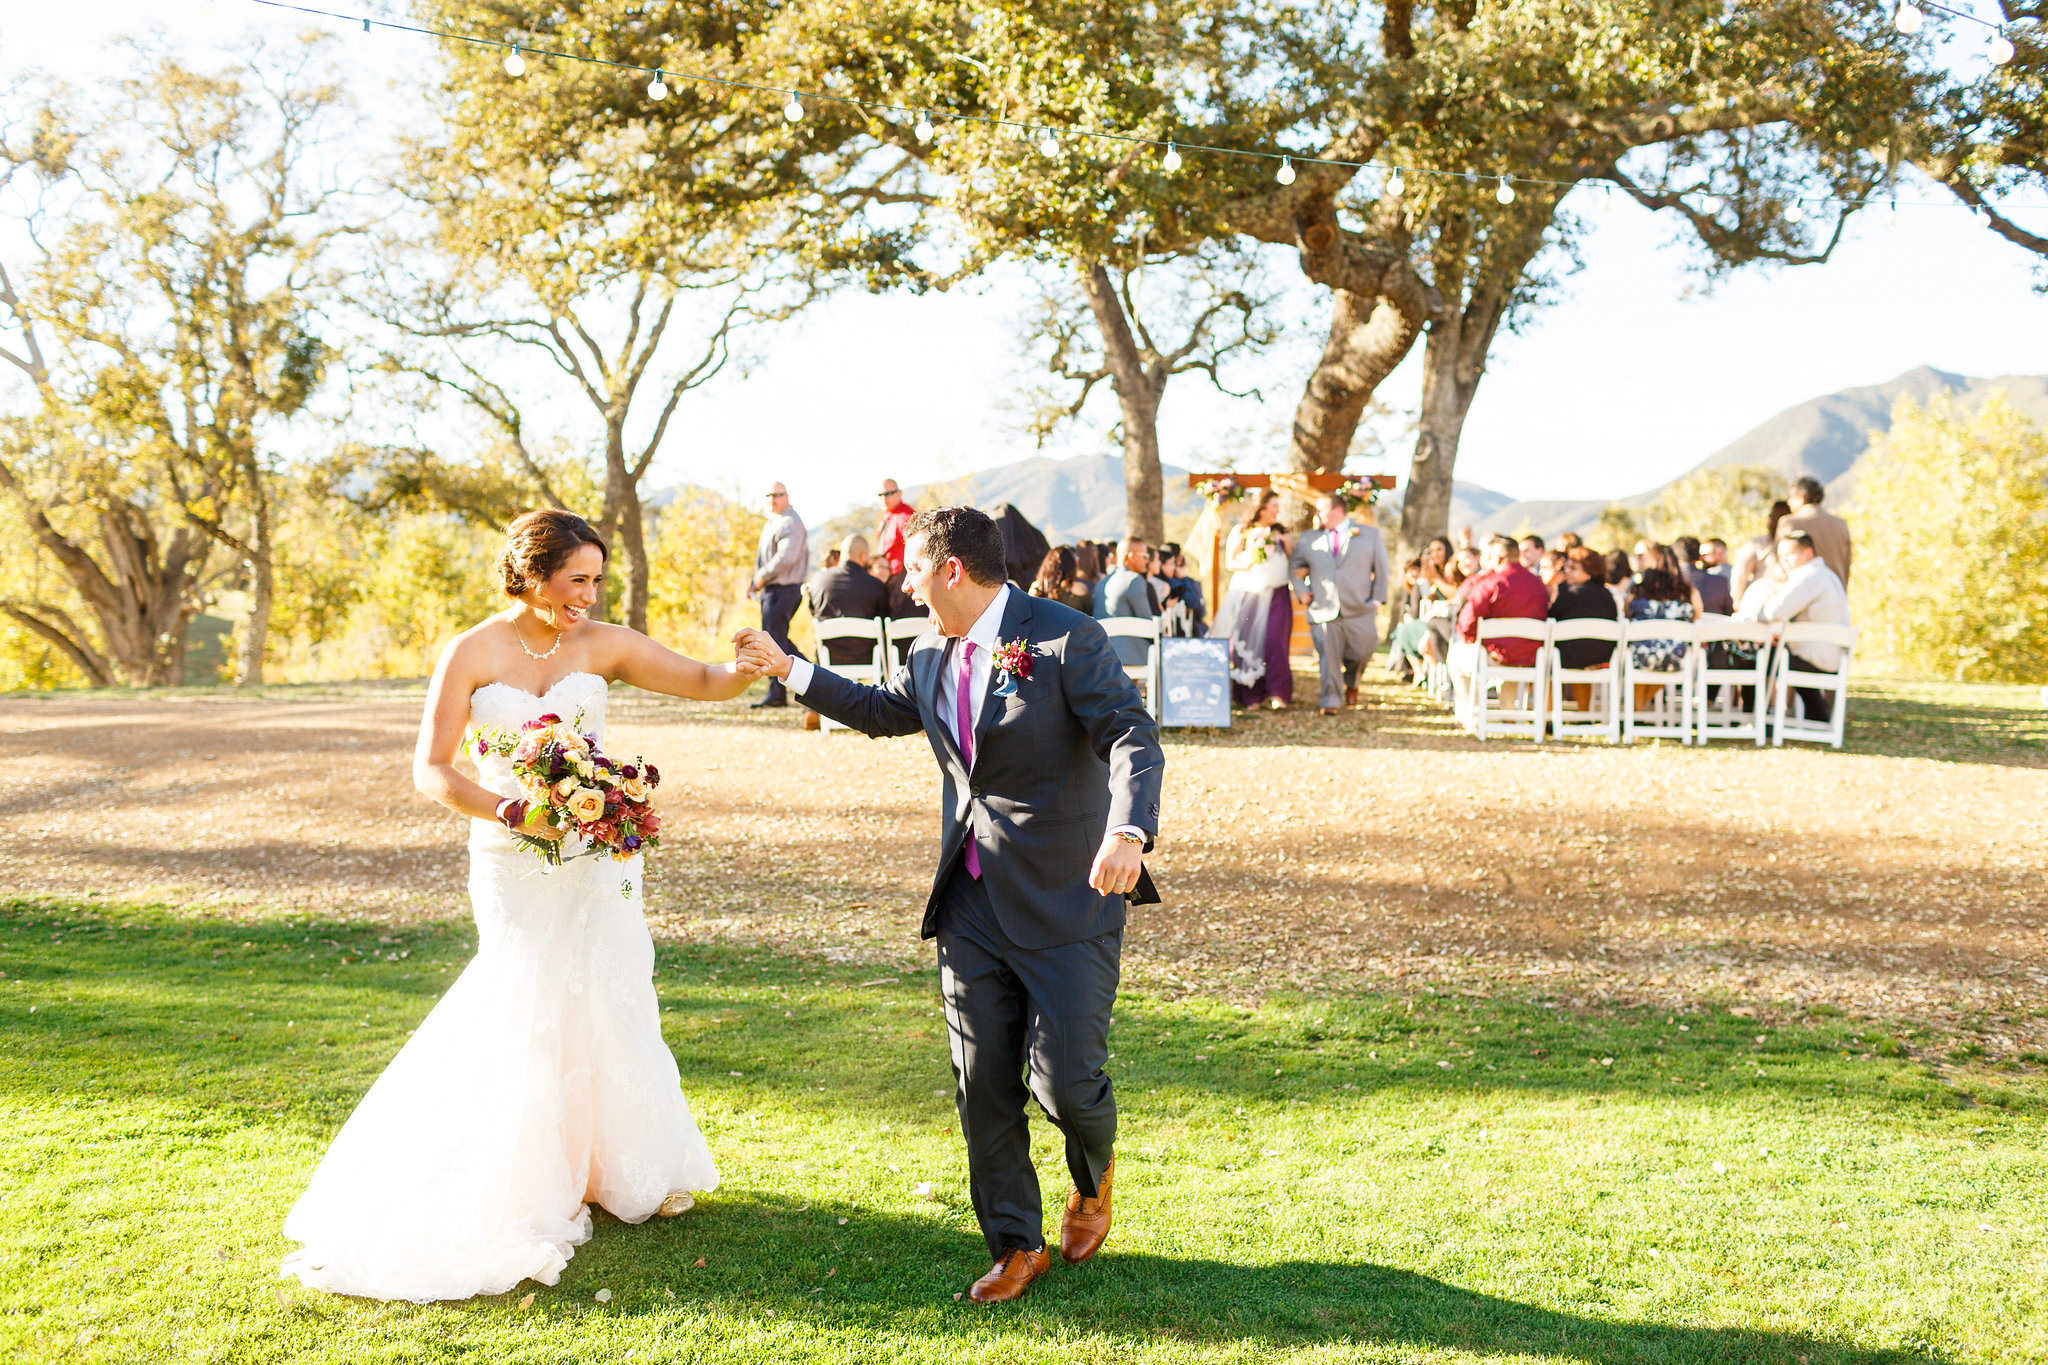 Bride and groom celebrate after walking down the aisle at Spanish Oaks Ranch.